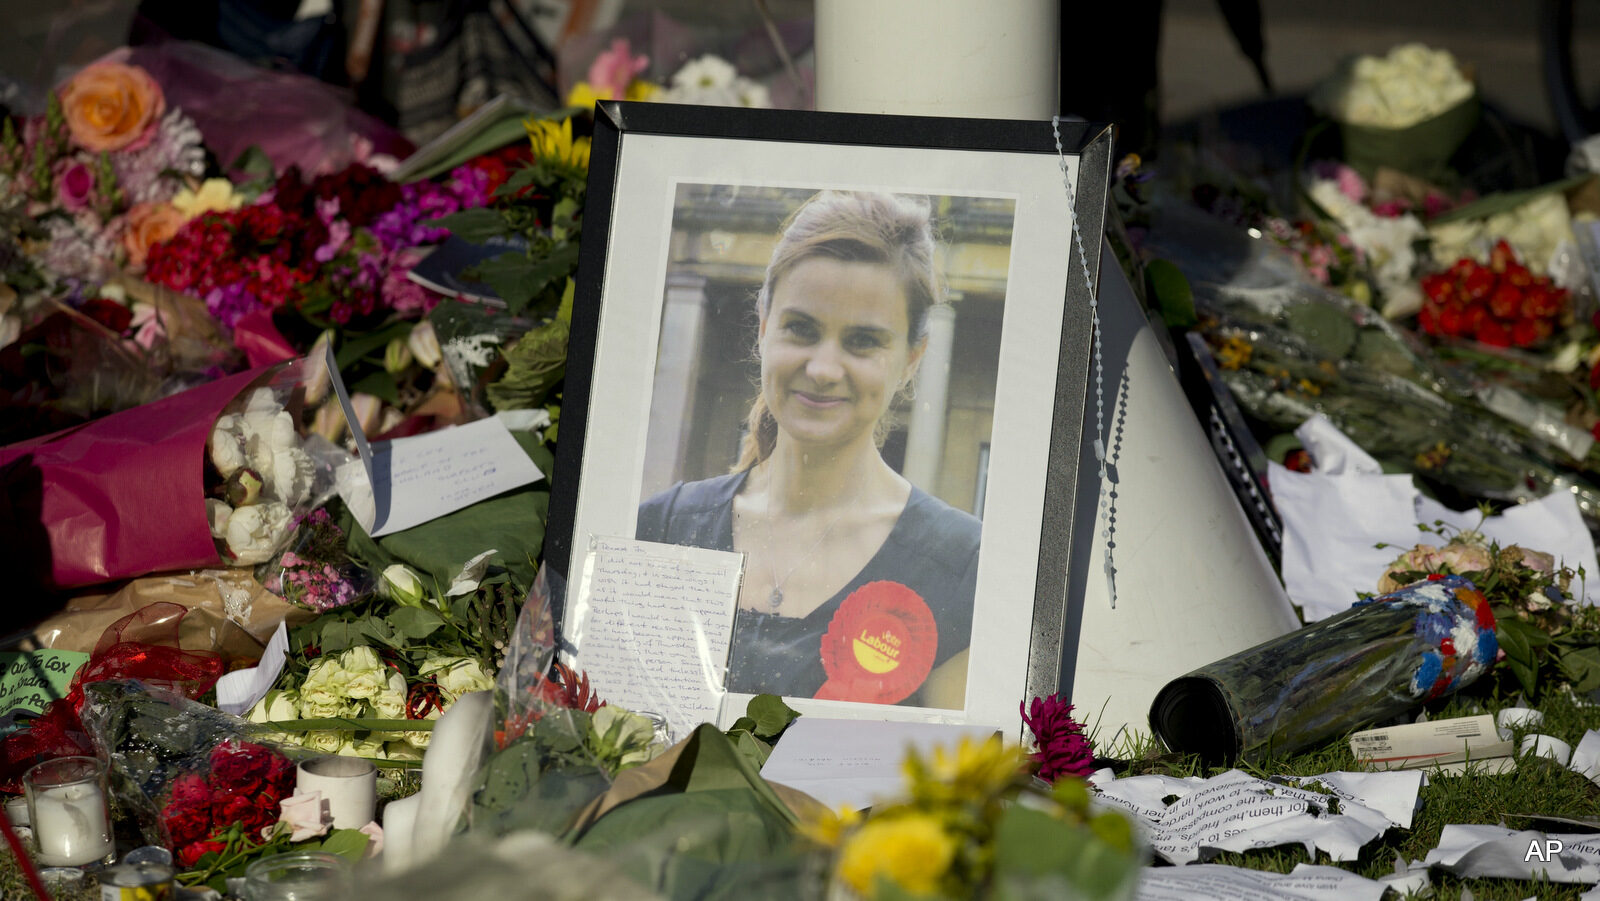 A photograph of Jo Cox, the 41-year-old Member of Parliament fatally shot last week in northern England, stands amongst tributes laid in her memory in Parliament Square, London, after a service of prayer and remembrance to commemorate her, Monday, June 20, 2016. The mother of two was shot on Thursday afternoon in her constituency near Leeds. The man charged with her slaying made a brief appearance in court by video link from prison Monday. (AP Photo/Matt Dunham)